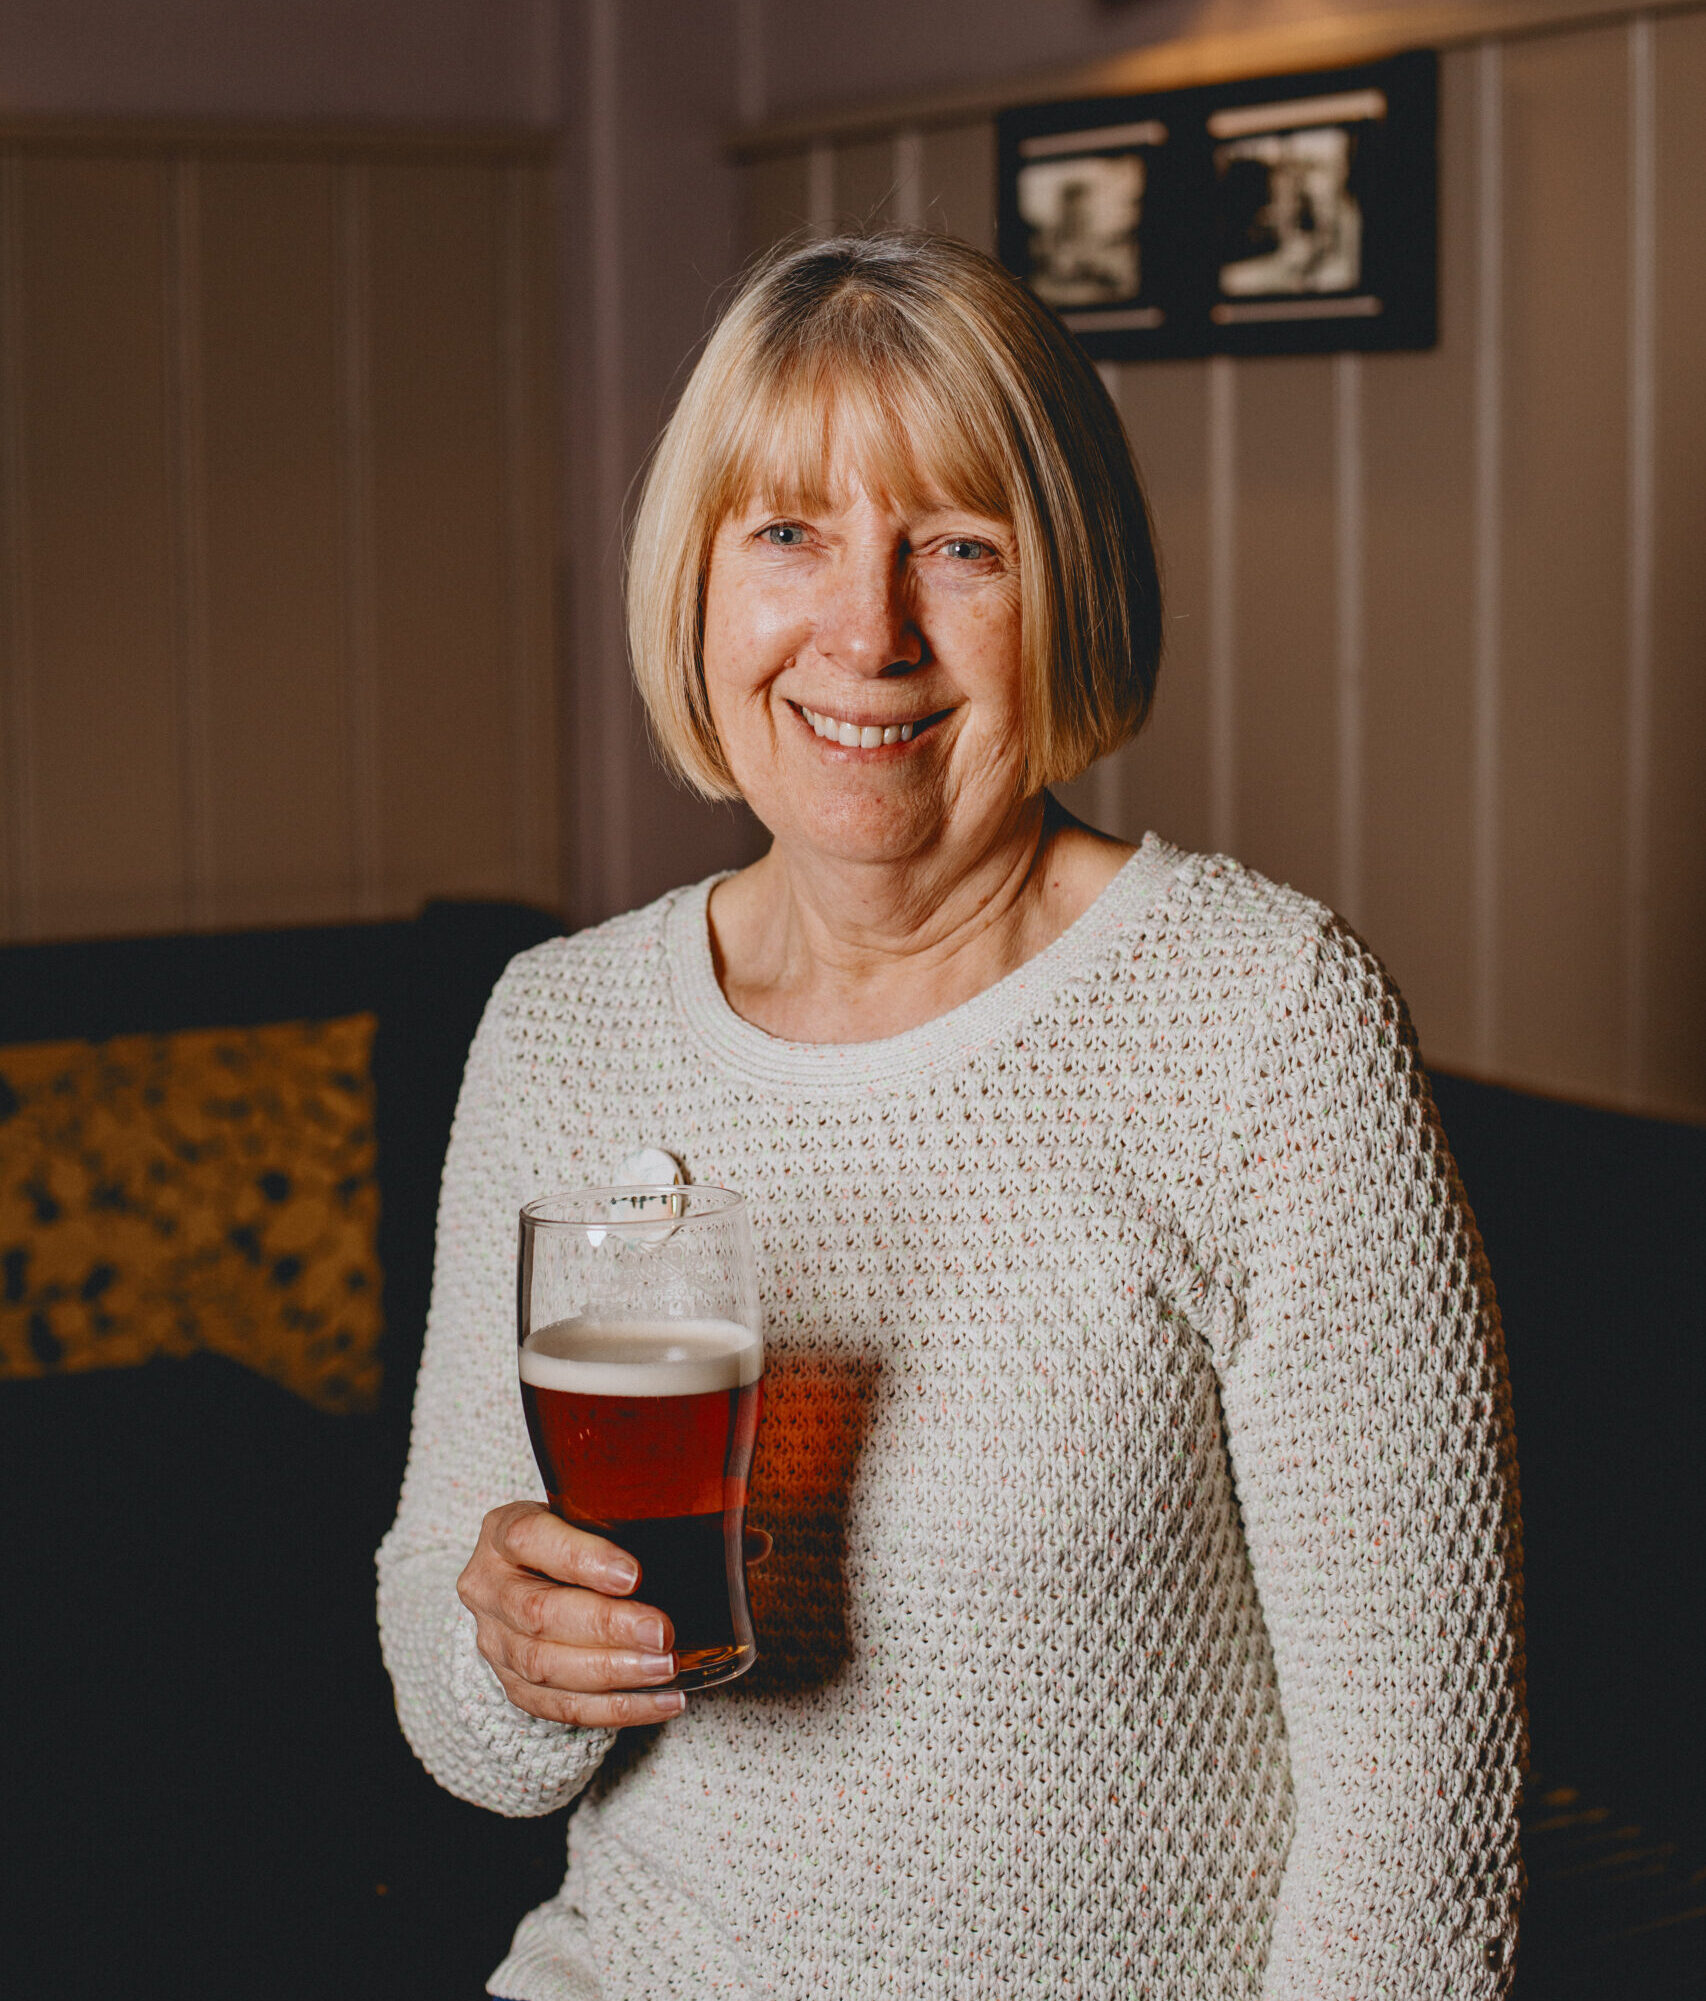 A woman stood up holding a pint of Bitter.